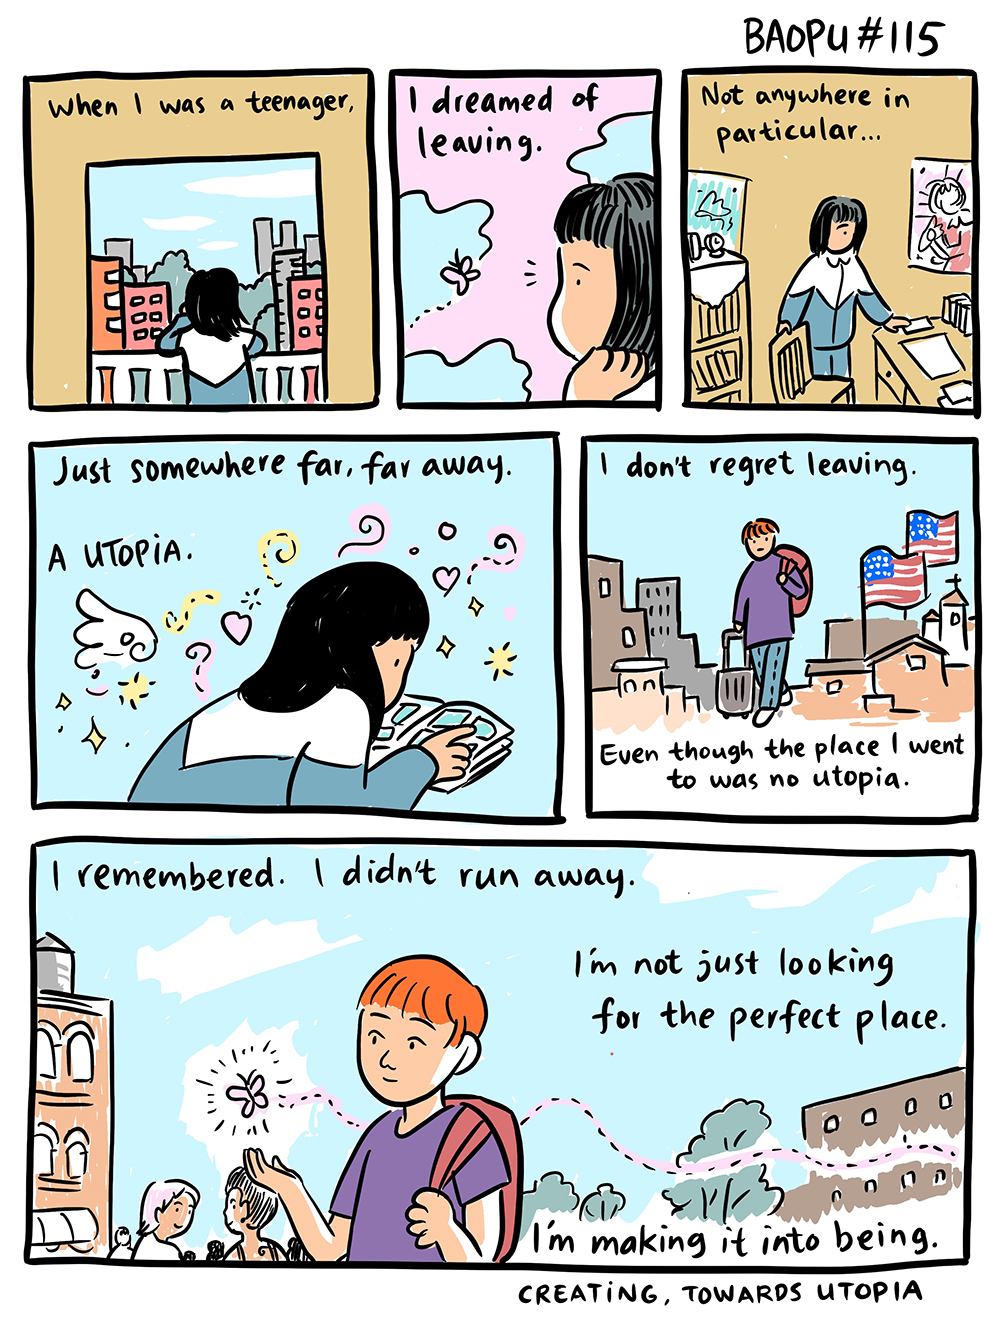 A six-panel comic that shows Baopu, an queer Asian person, as a teenager with a long Black bob in China and later as an adult with short red hair. The cartoon depicts their immigration to America. Throughout the image, there is poem: When I was a teenager, I dreamed of leaving. Not anywhere in particular... Just somewhere far, far away. a Utopia. I don't regret leaving. Even though the place I went to was no utopia. I remembered. I didn't run away. I'm not just looking for the perfect place. I'm making it into being. Creating, towards utopia.